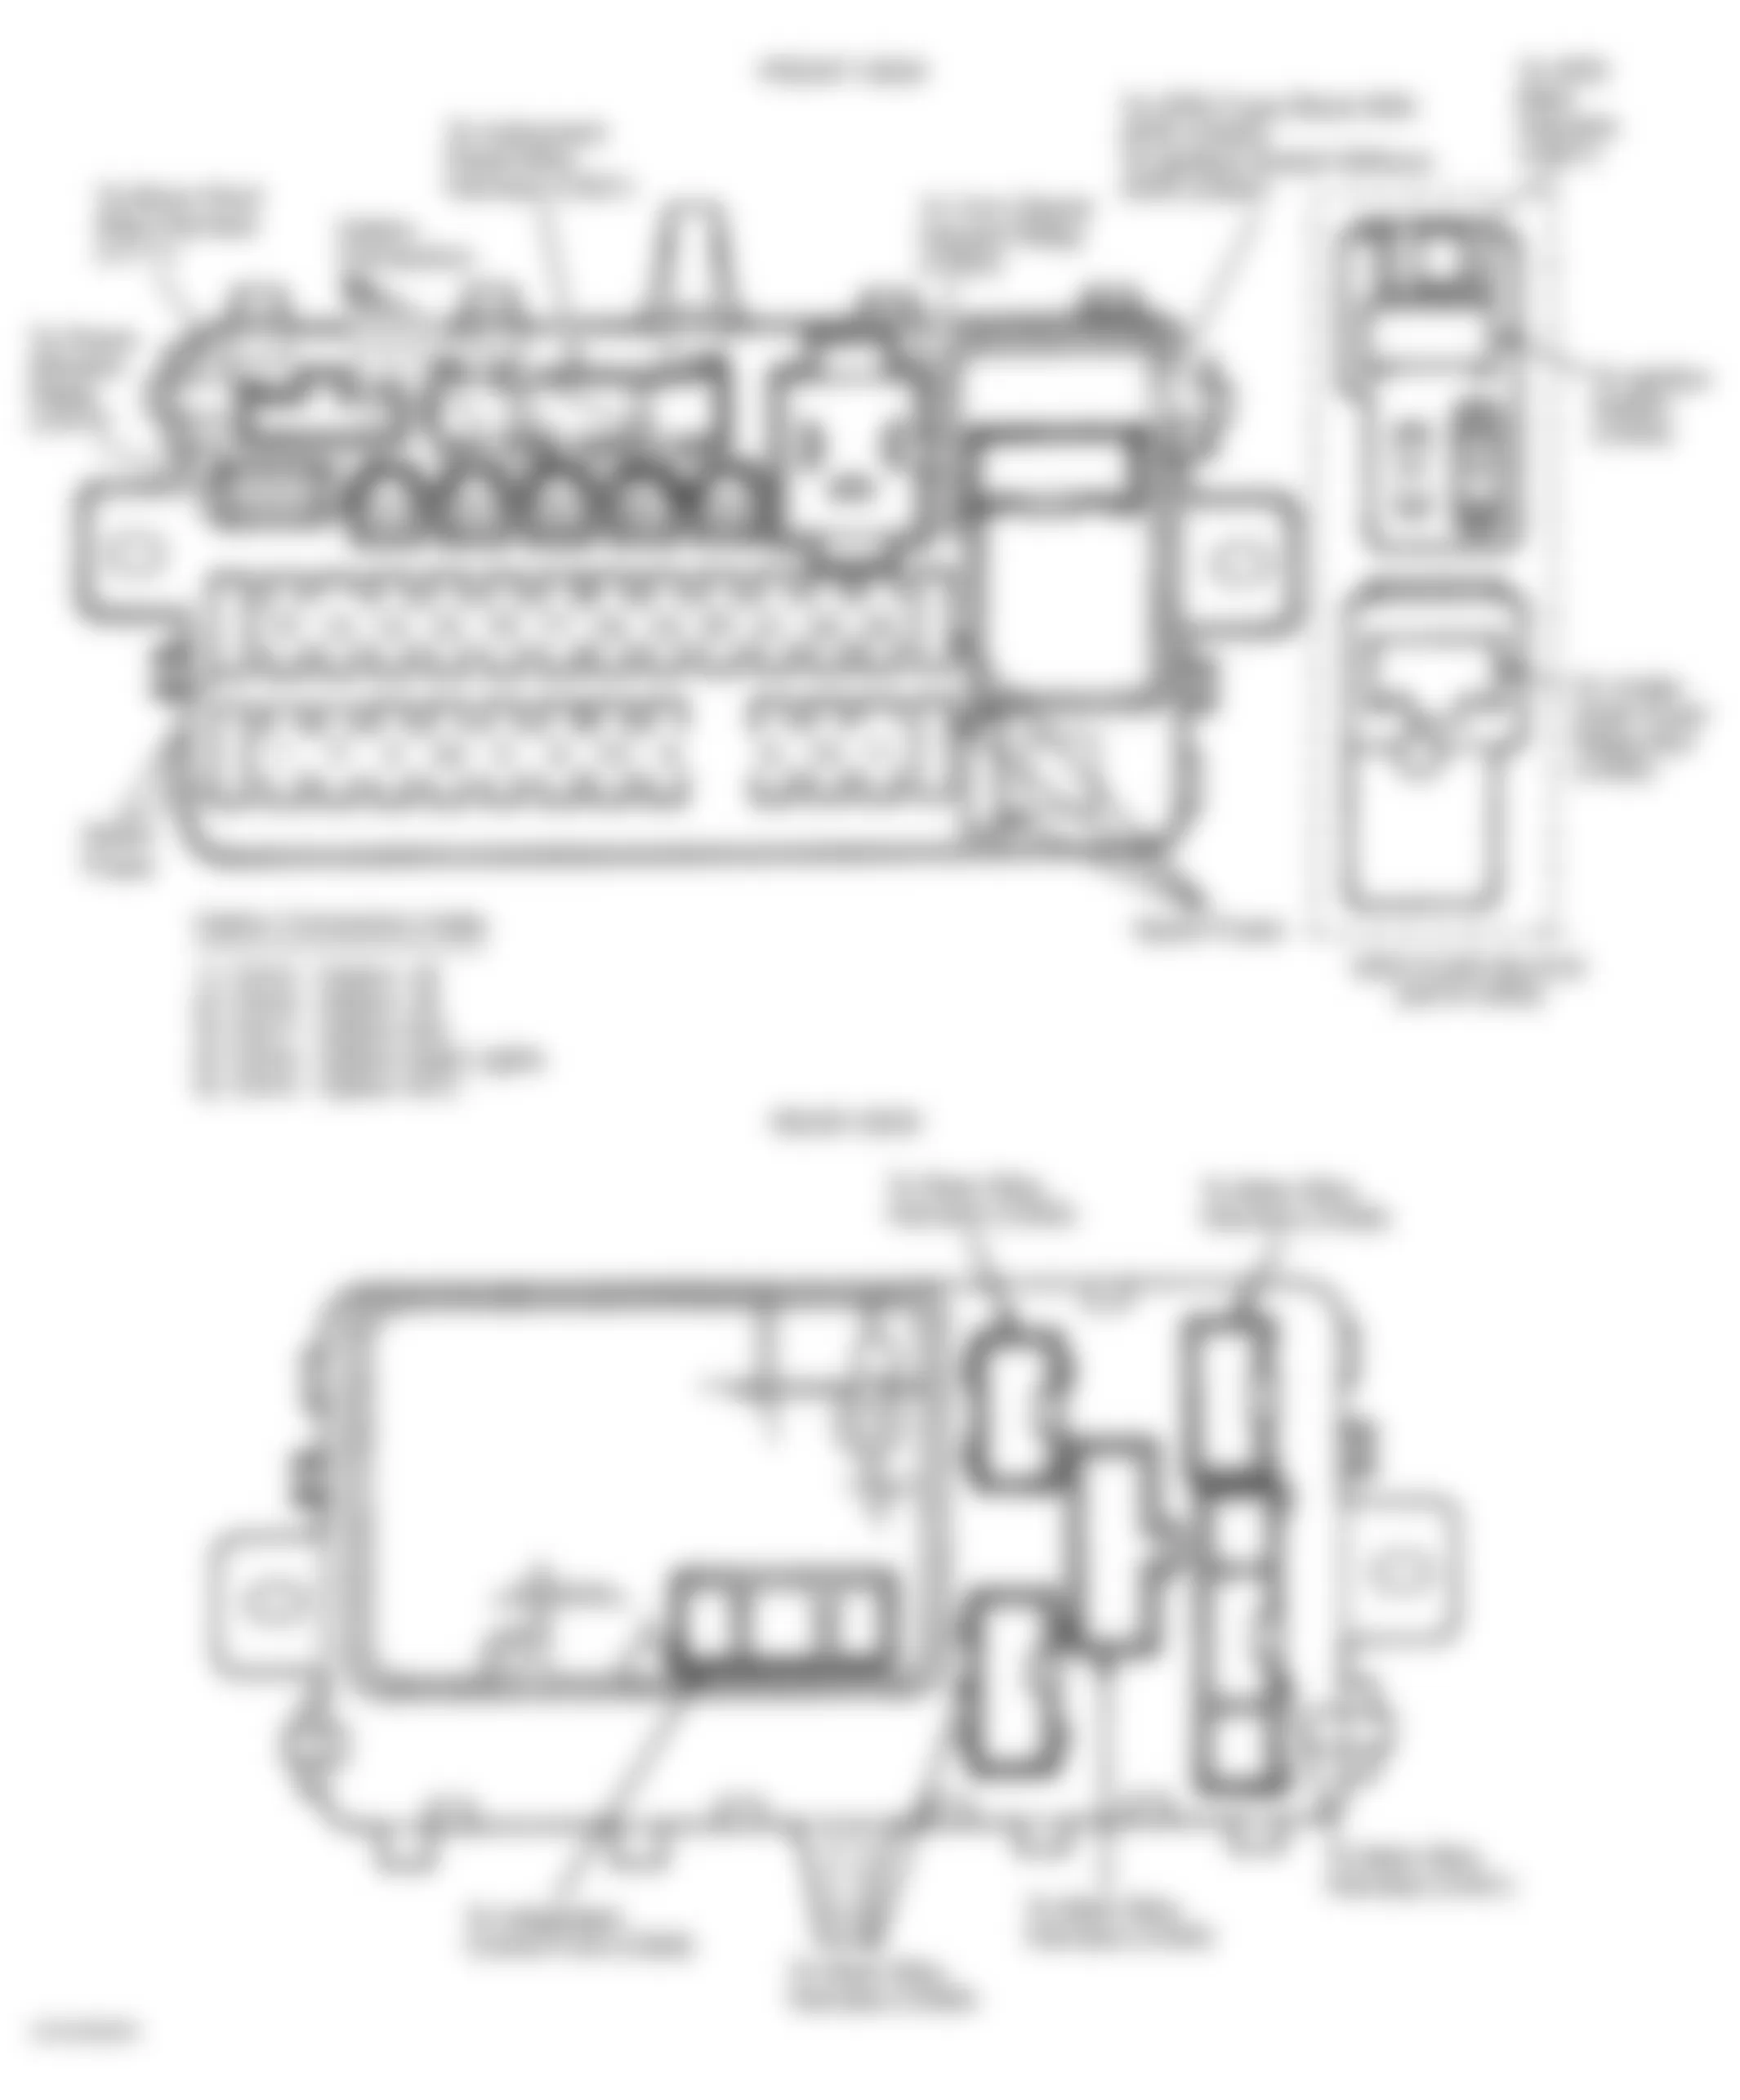 Honda Civic LX 1992 - Component Locations -  Identifying Under-Dash Fuse/Relay Box Components (1994-95 Civic)